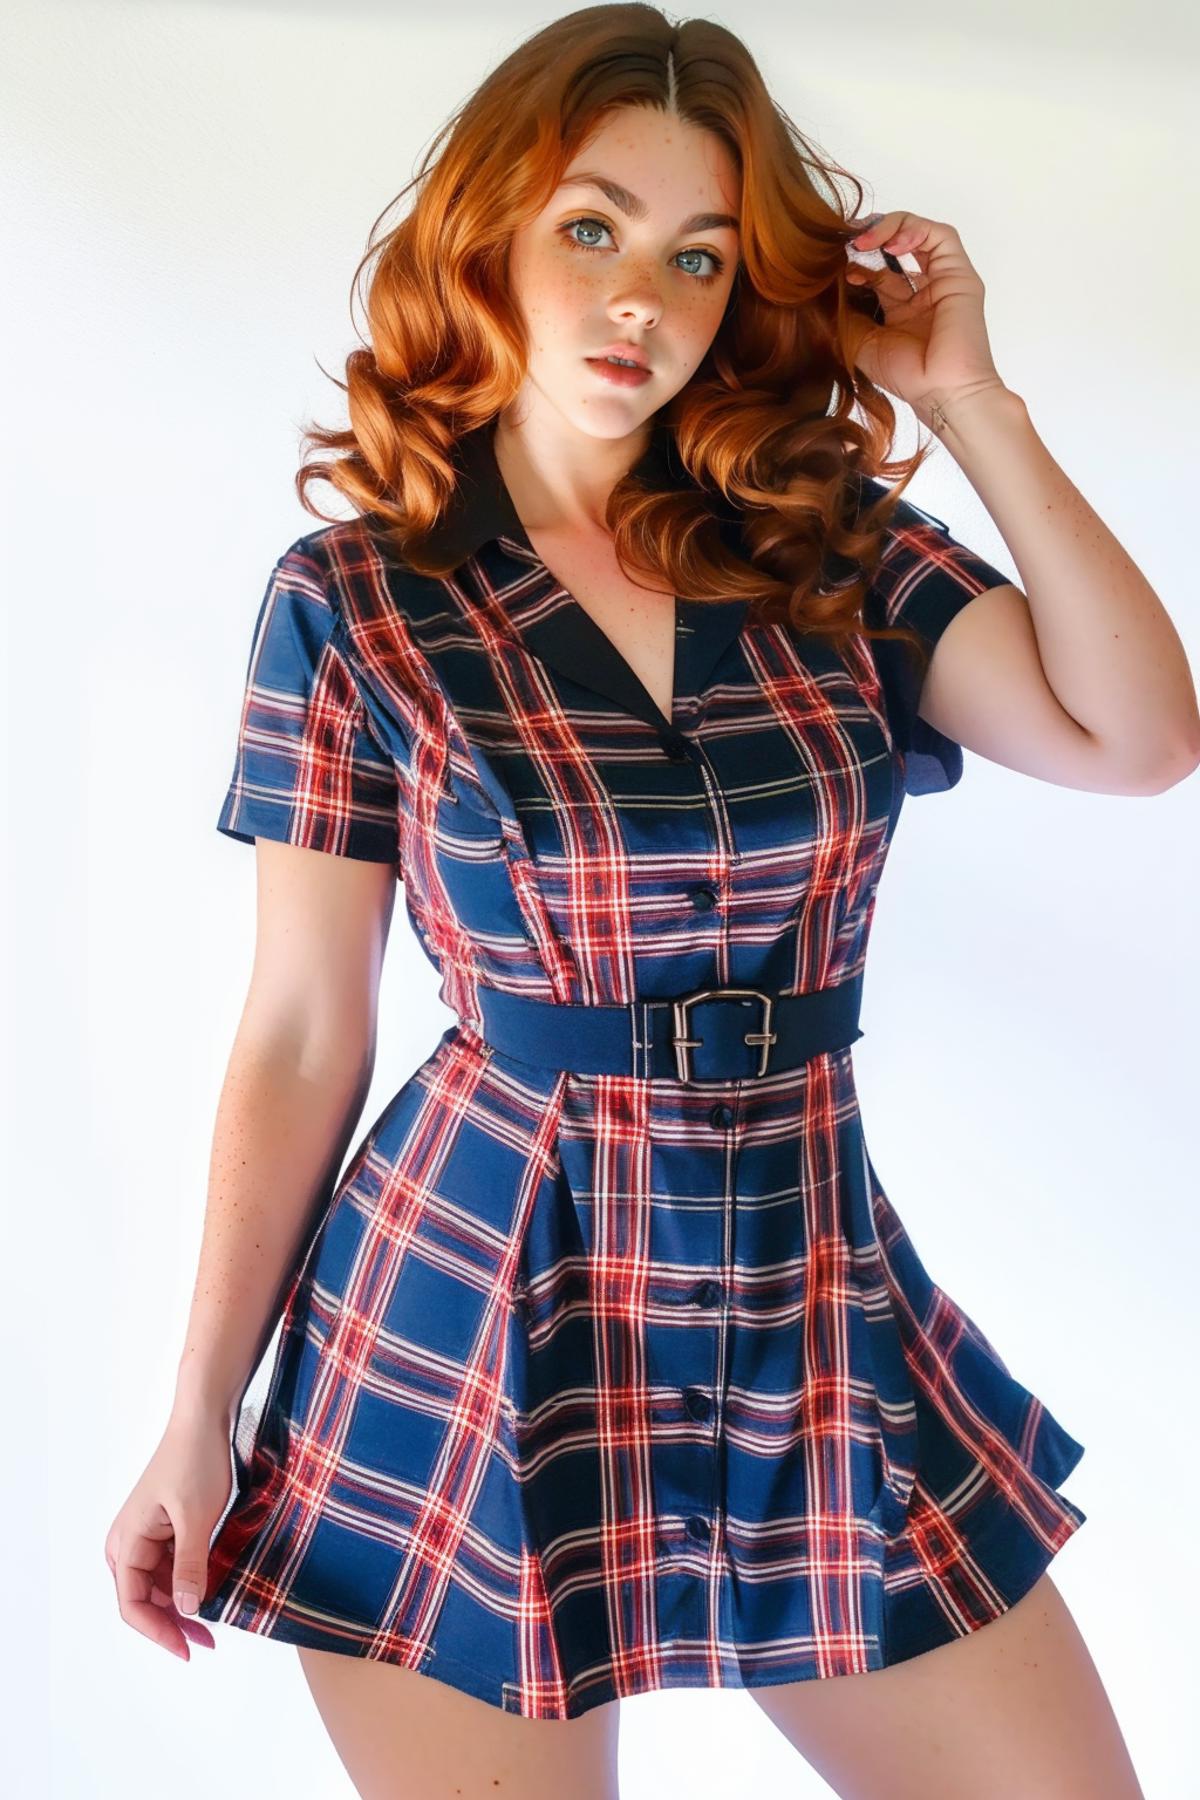 A woman wearing a blue and red plaid dress with a belt.